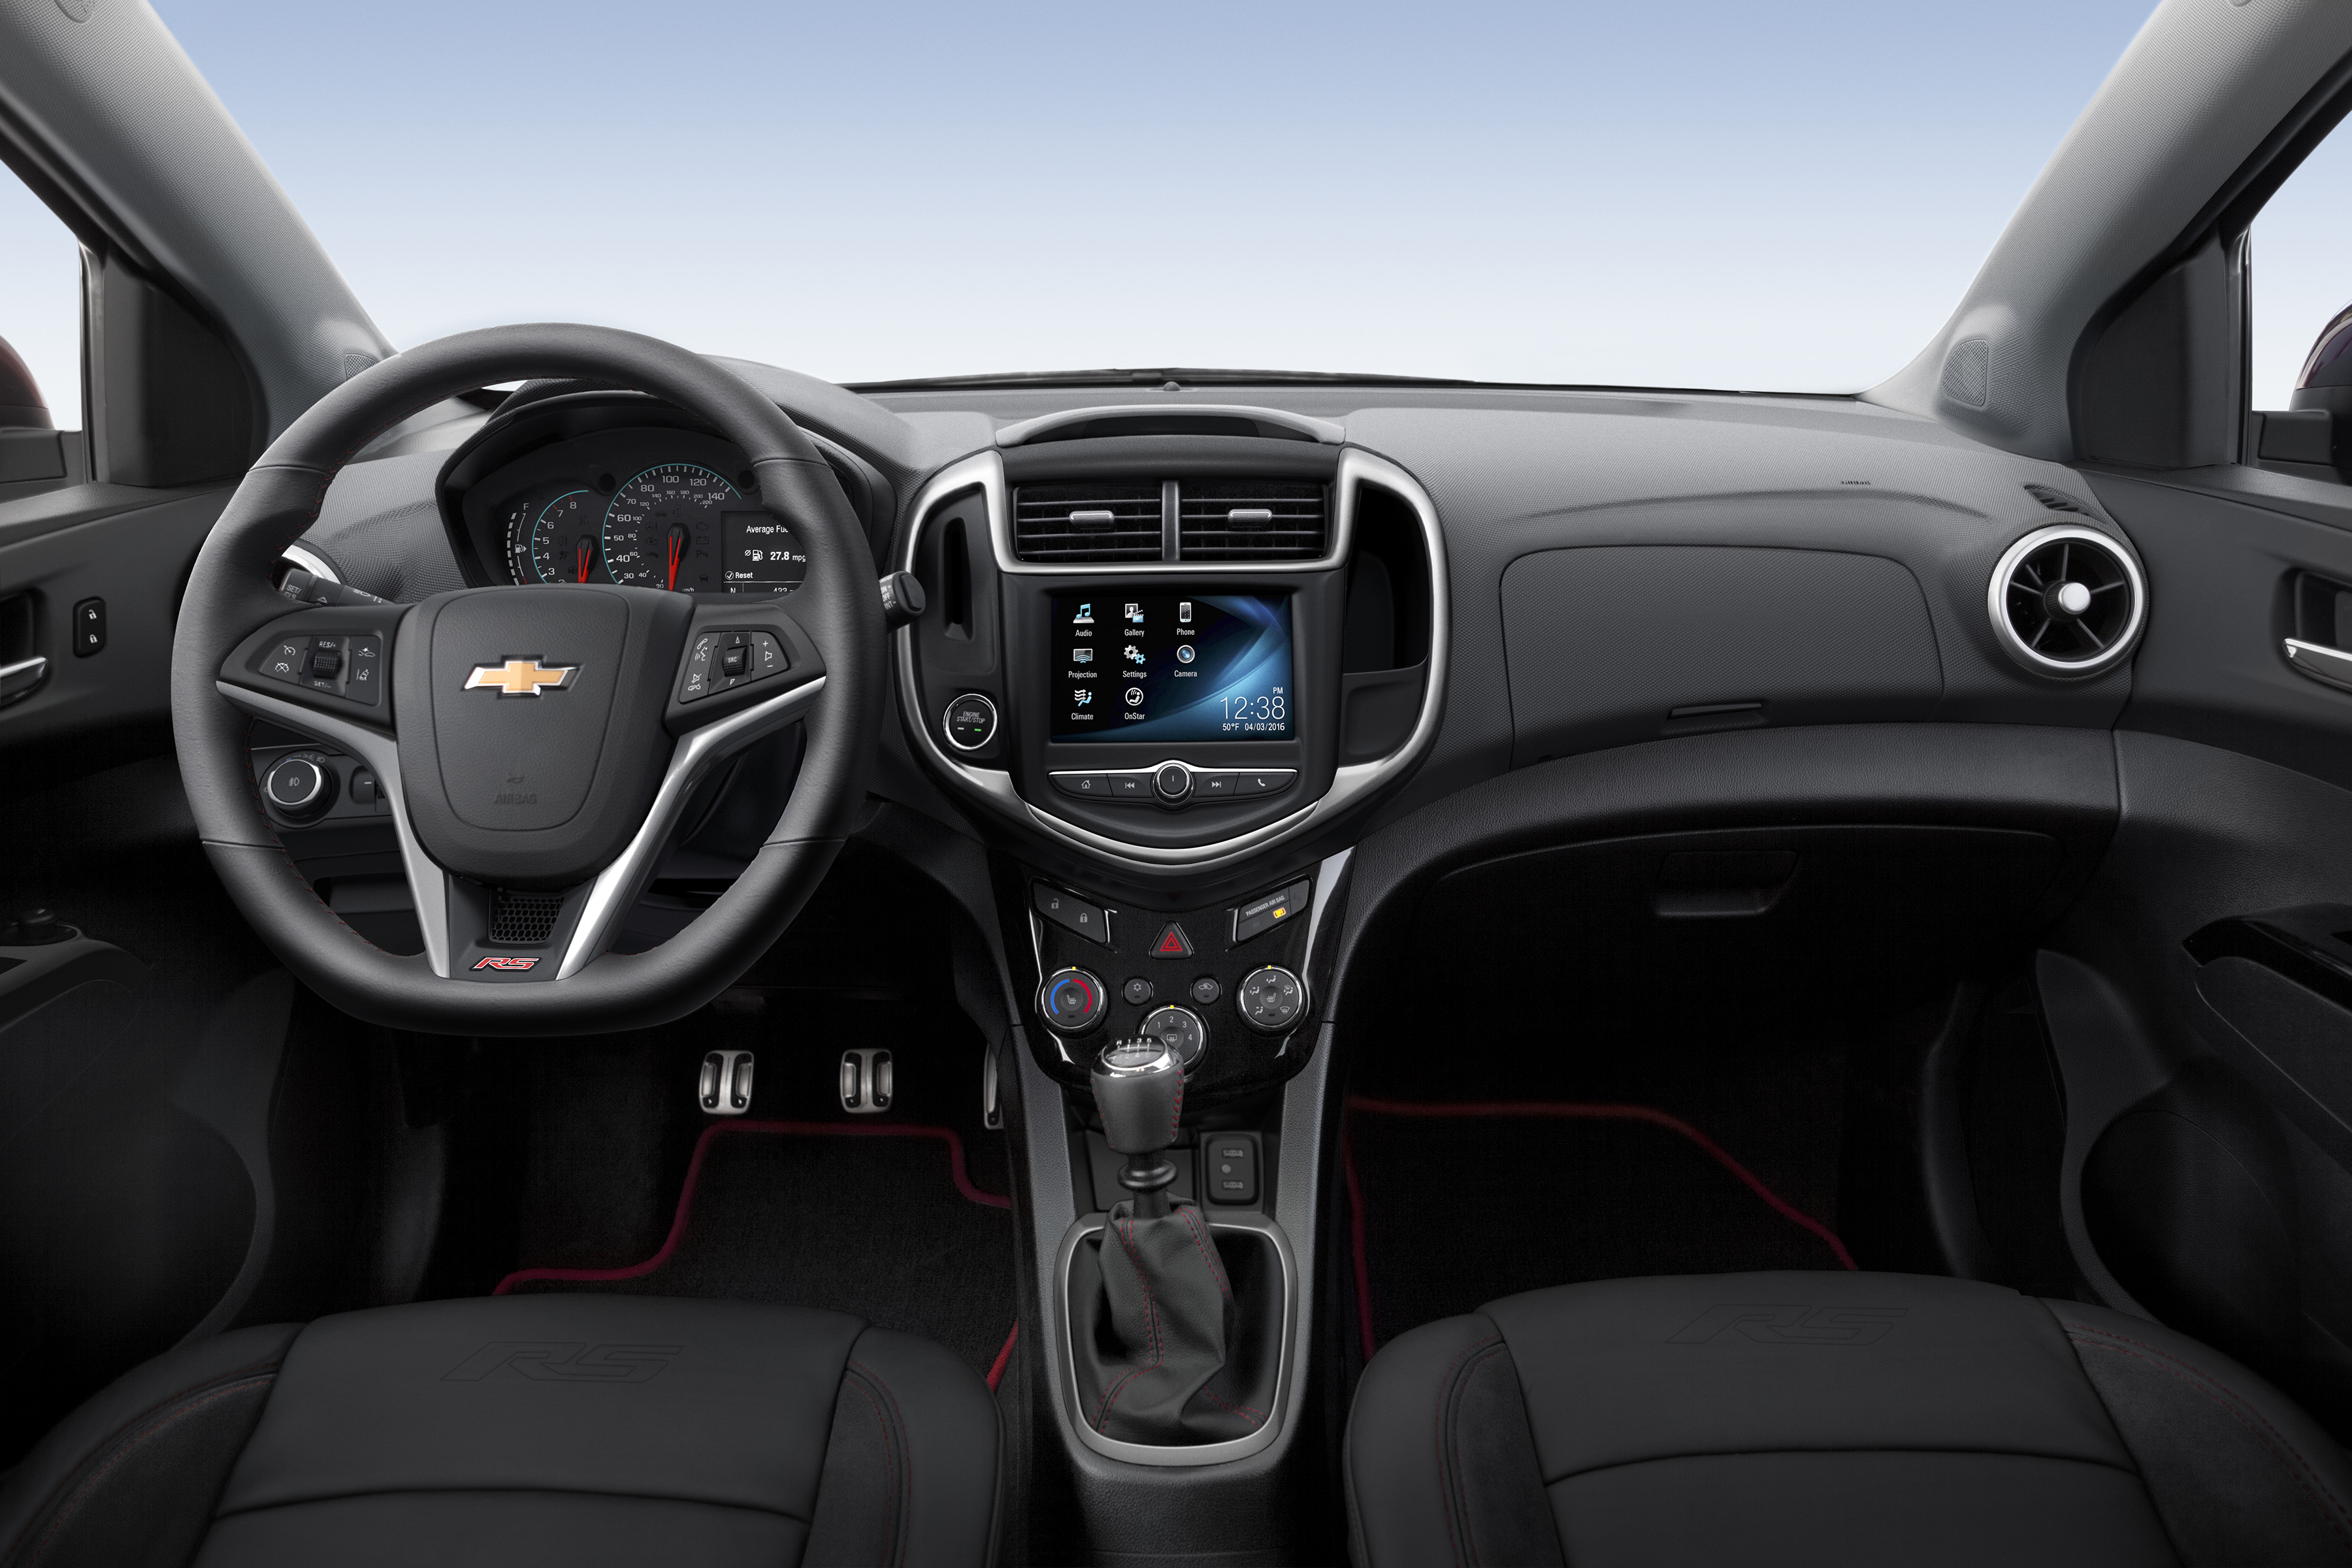 The all black interior of the 2020 Chevy Sonic.